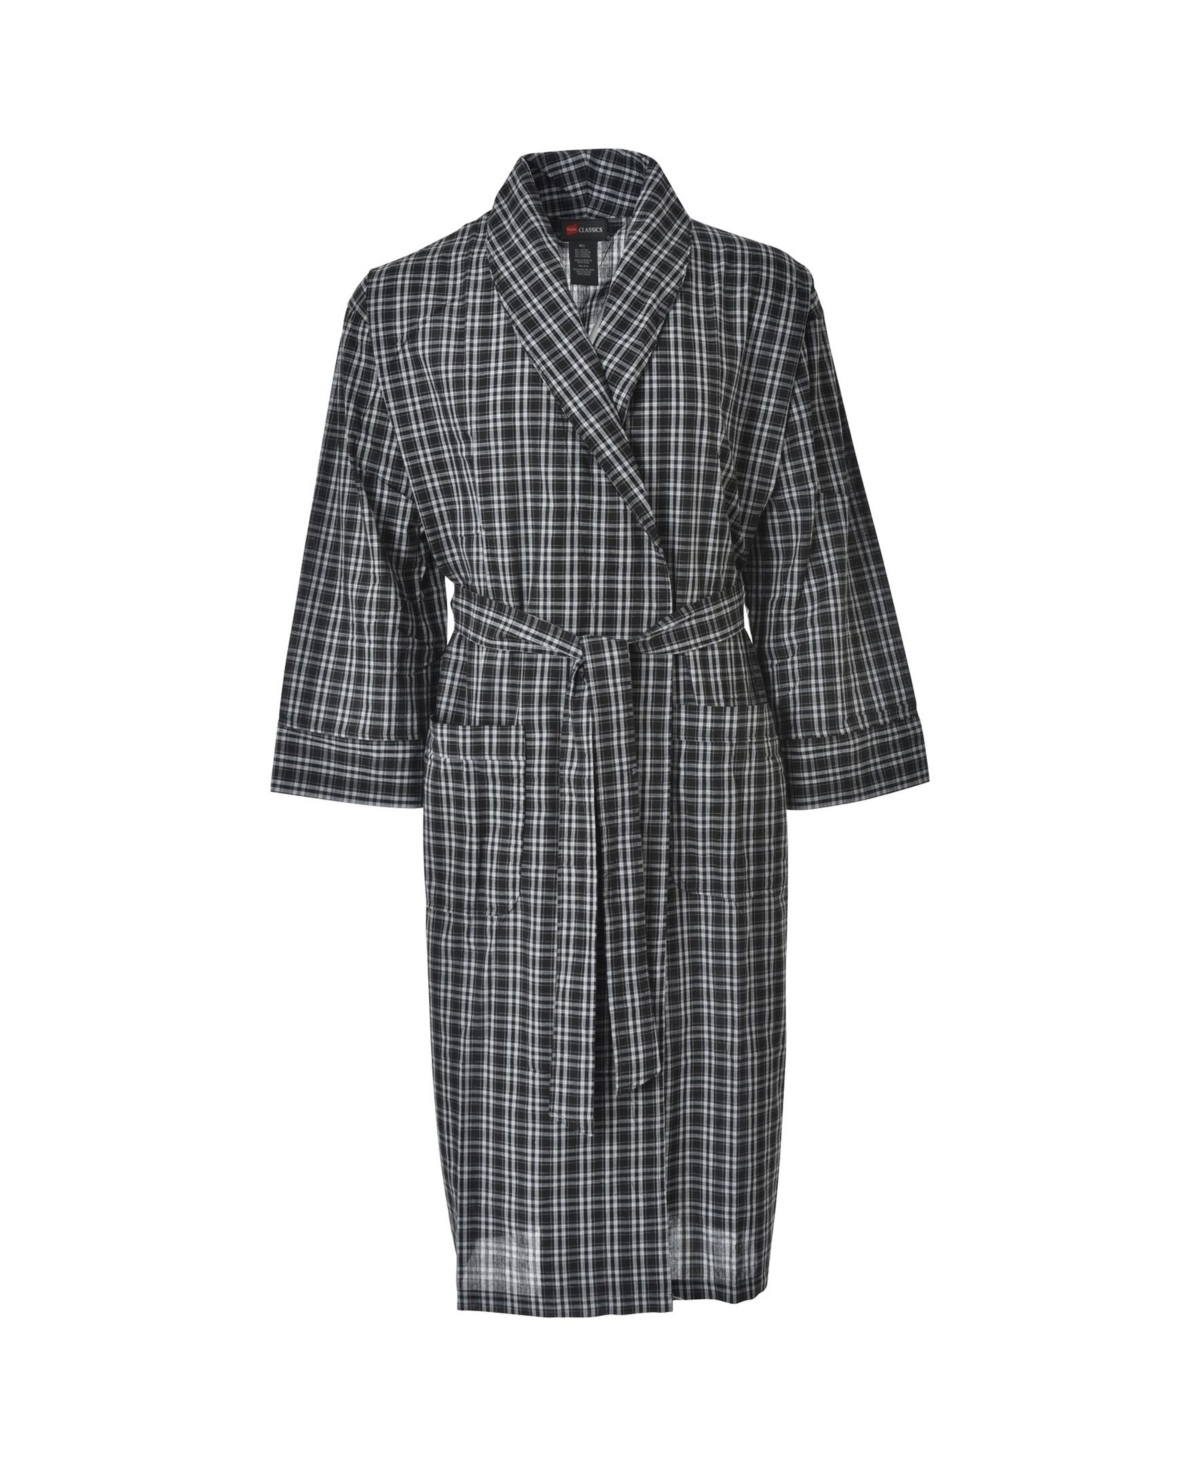 Hanes Men's Big and Tall Woven Shawl Robe - Red Plaid